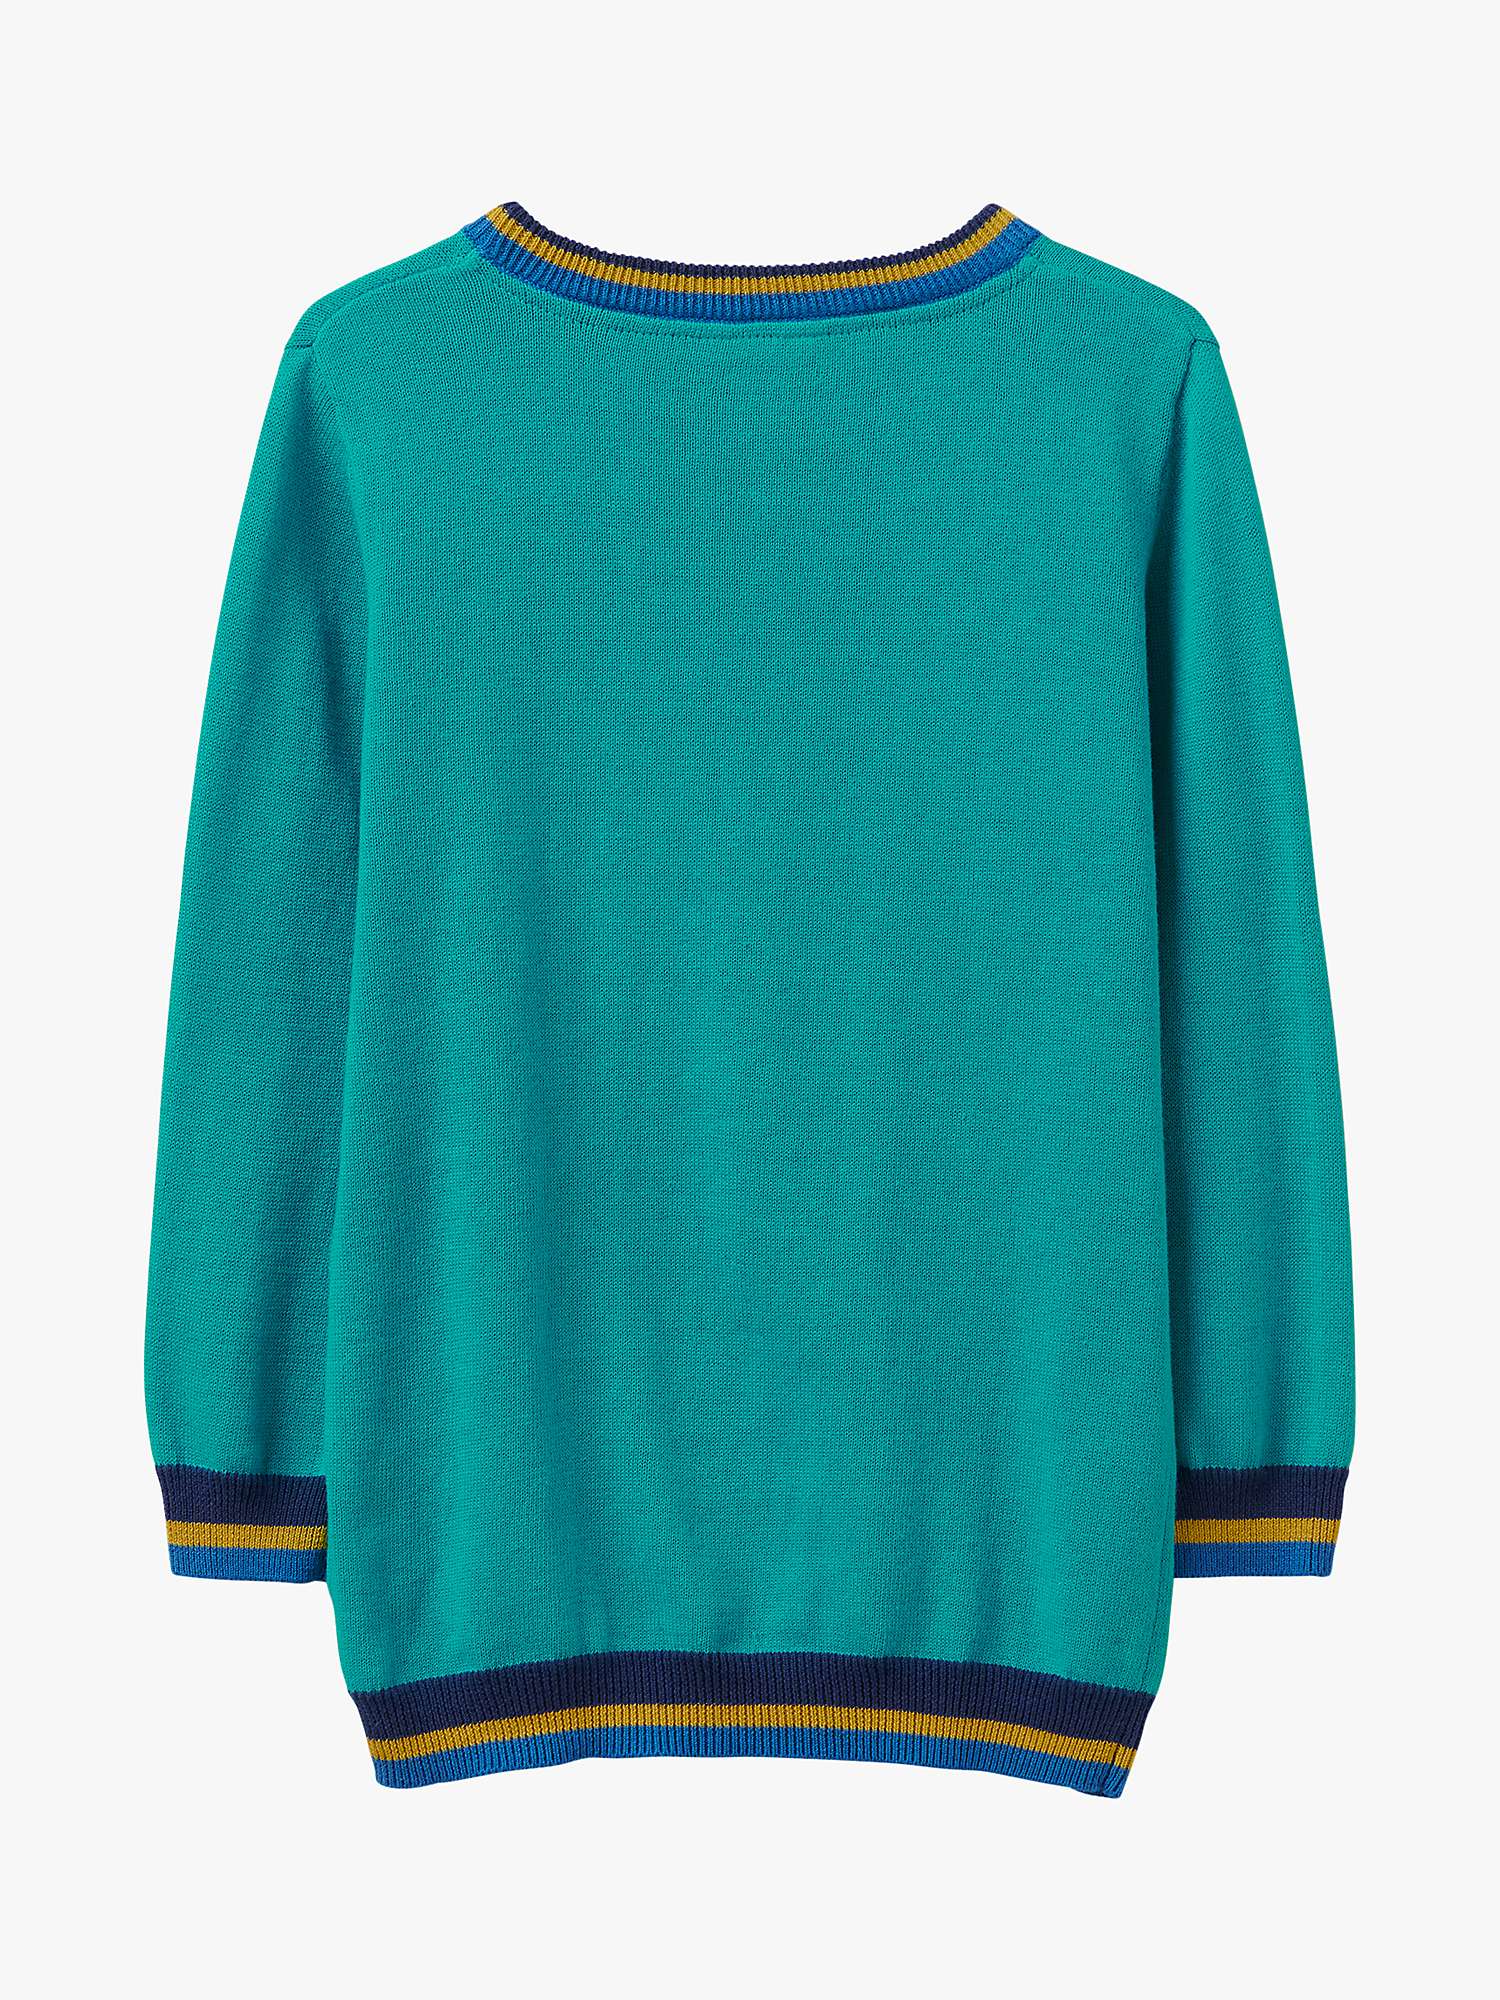 Buy Crew Clothing Kids' Fly Fishing Crew Neck Jumper, Turquoise Blue Online at johnlewis.com